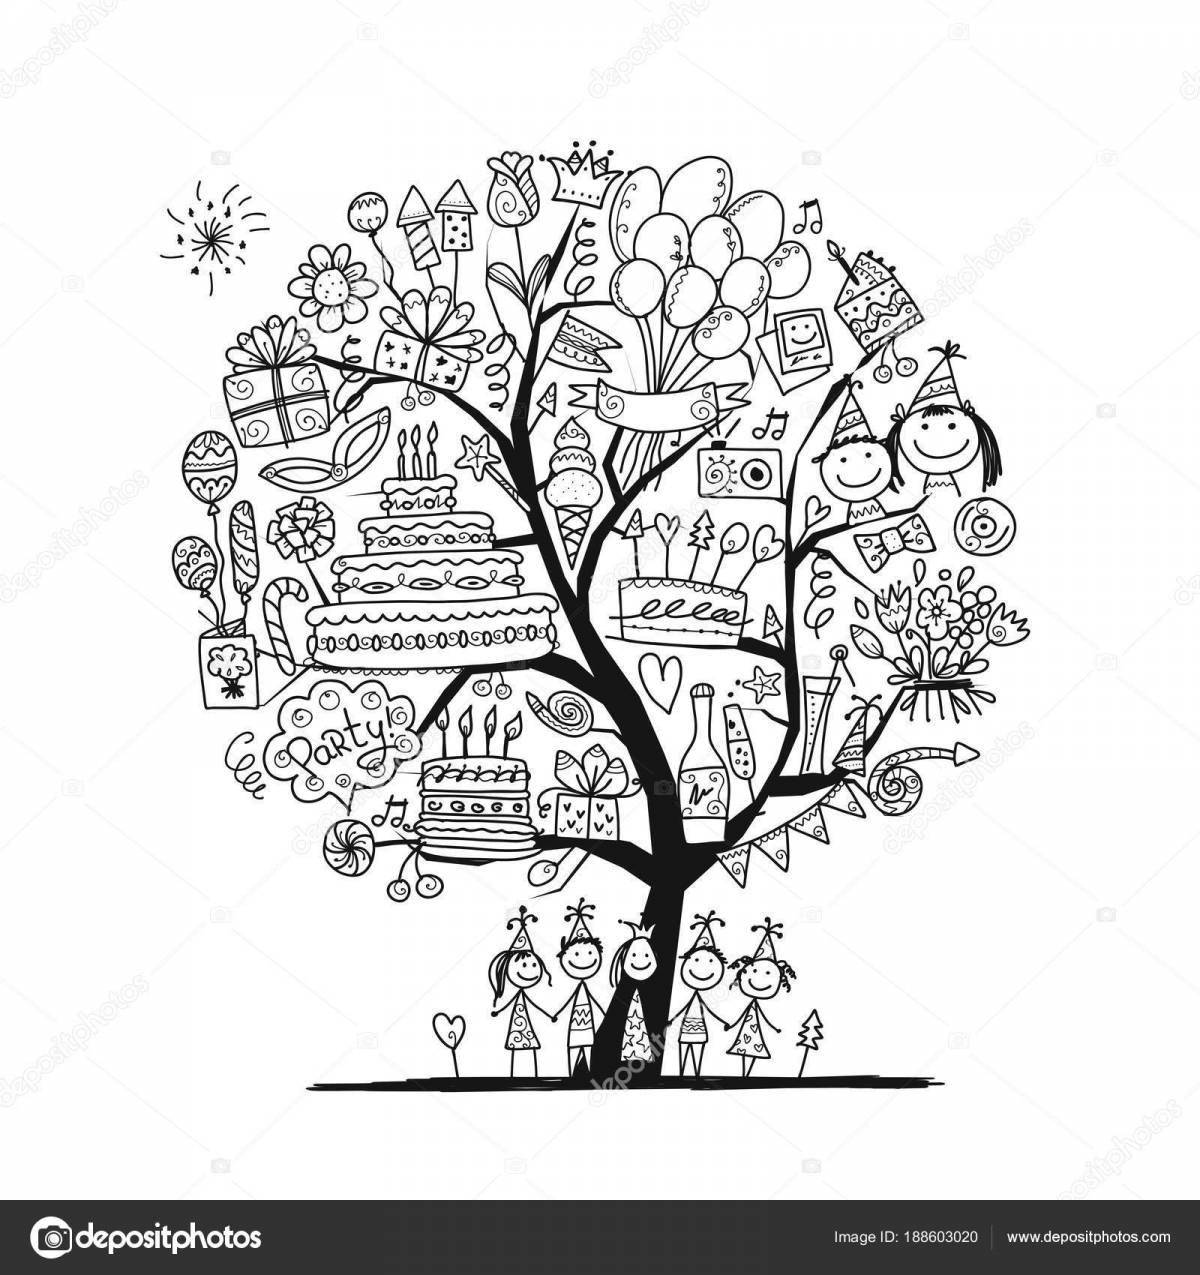 Exquisite wonder tree coloring page